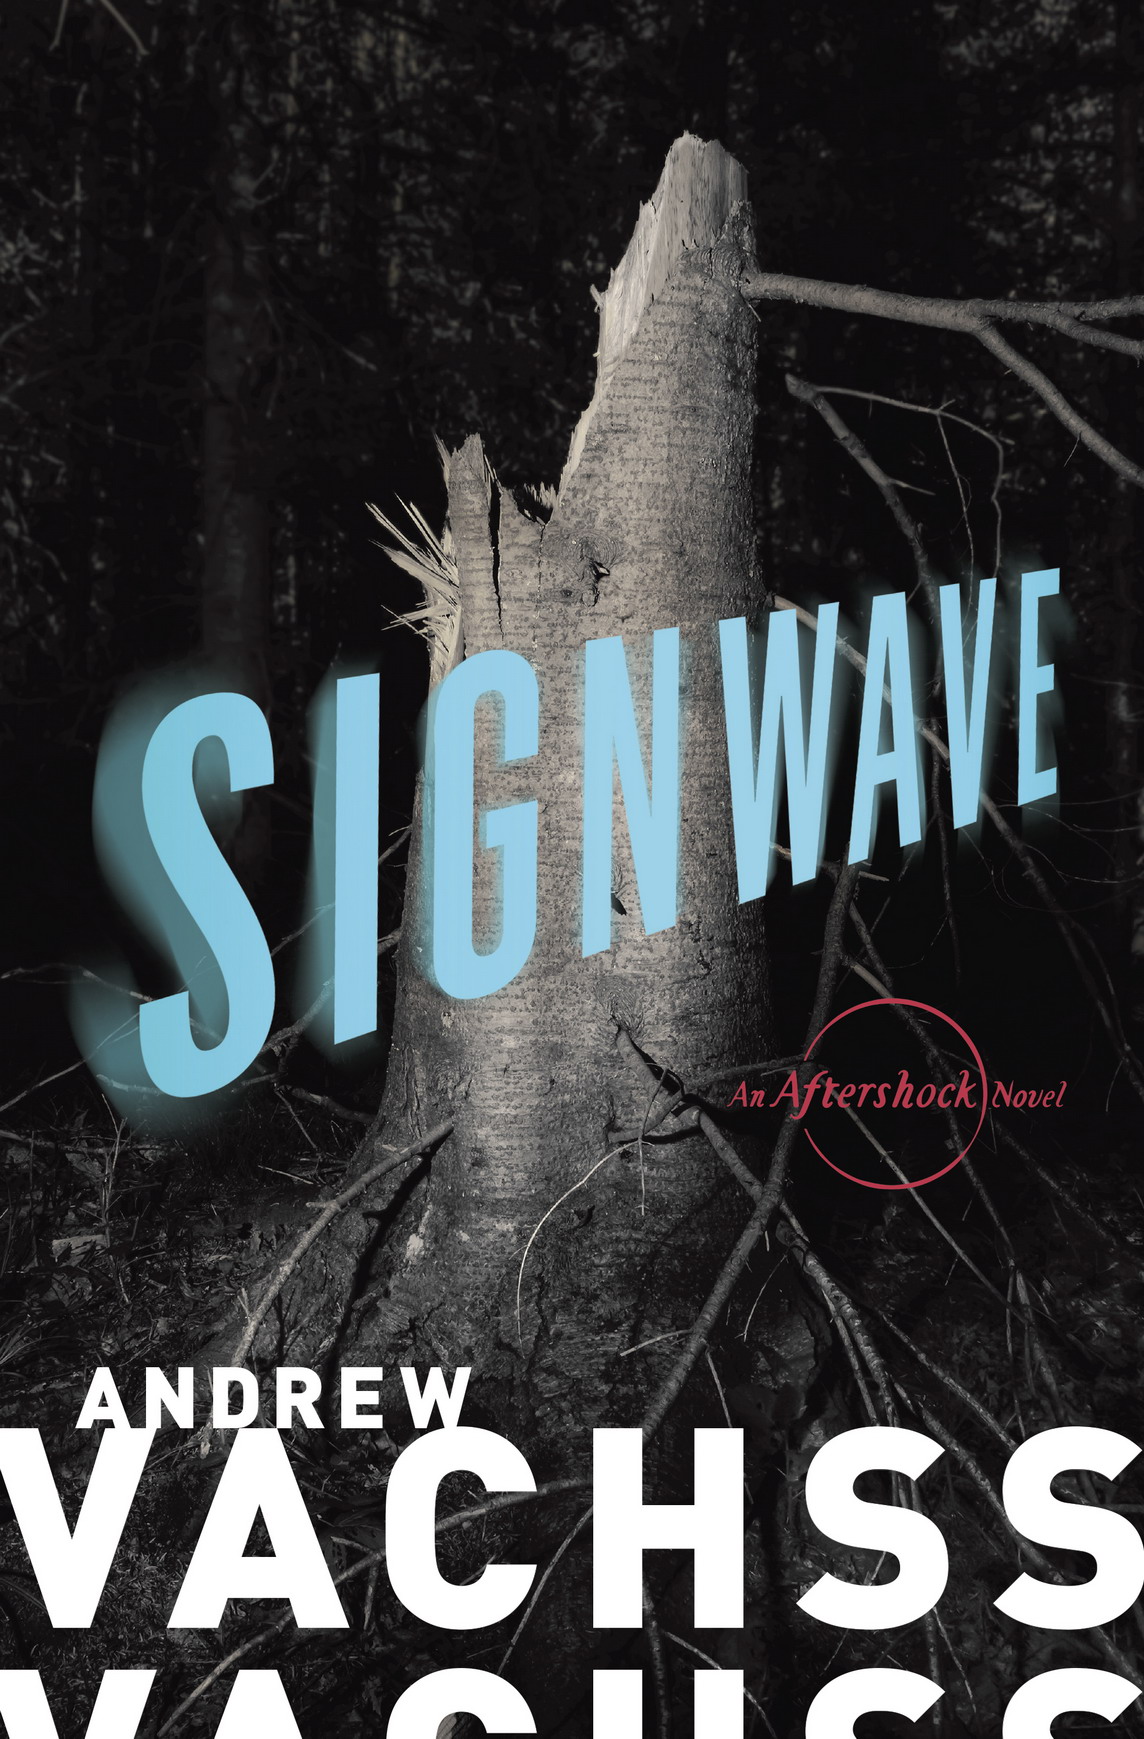 Signwave (2015) by Andrew Vachss